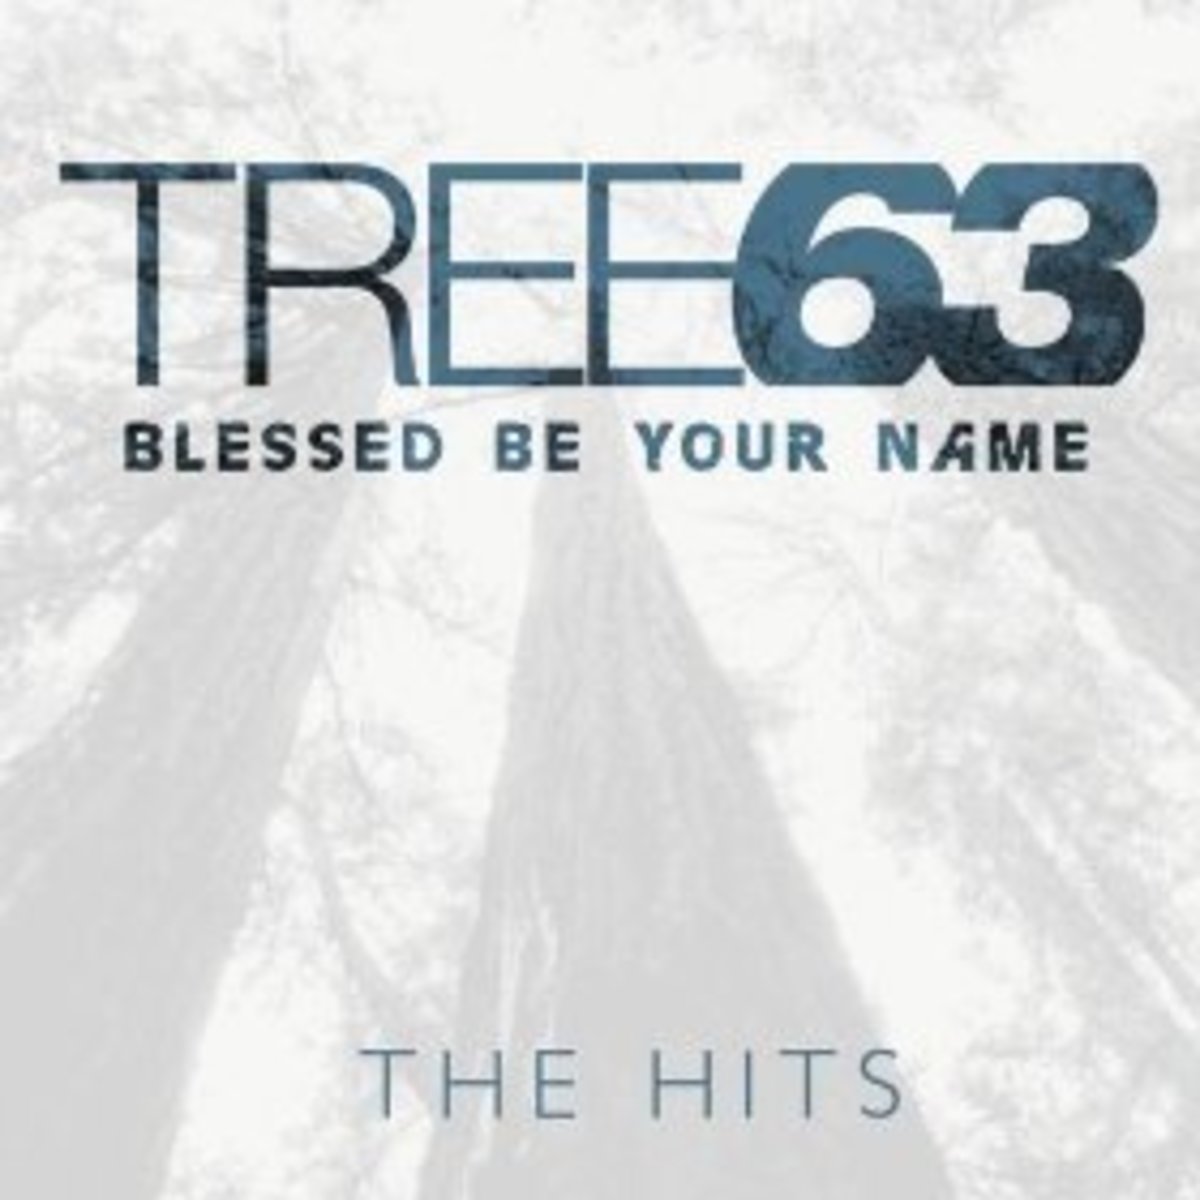 "Blessed Be Your Name," Tree63